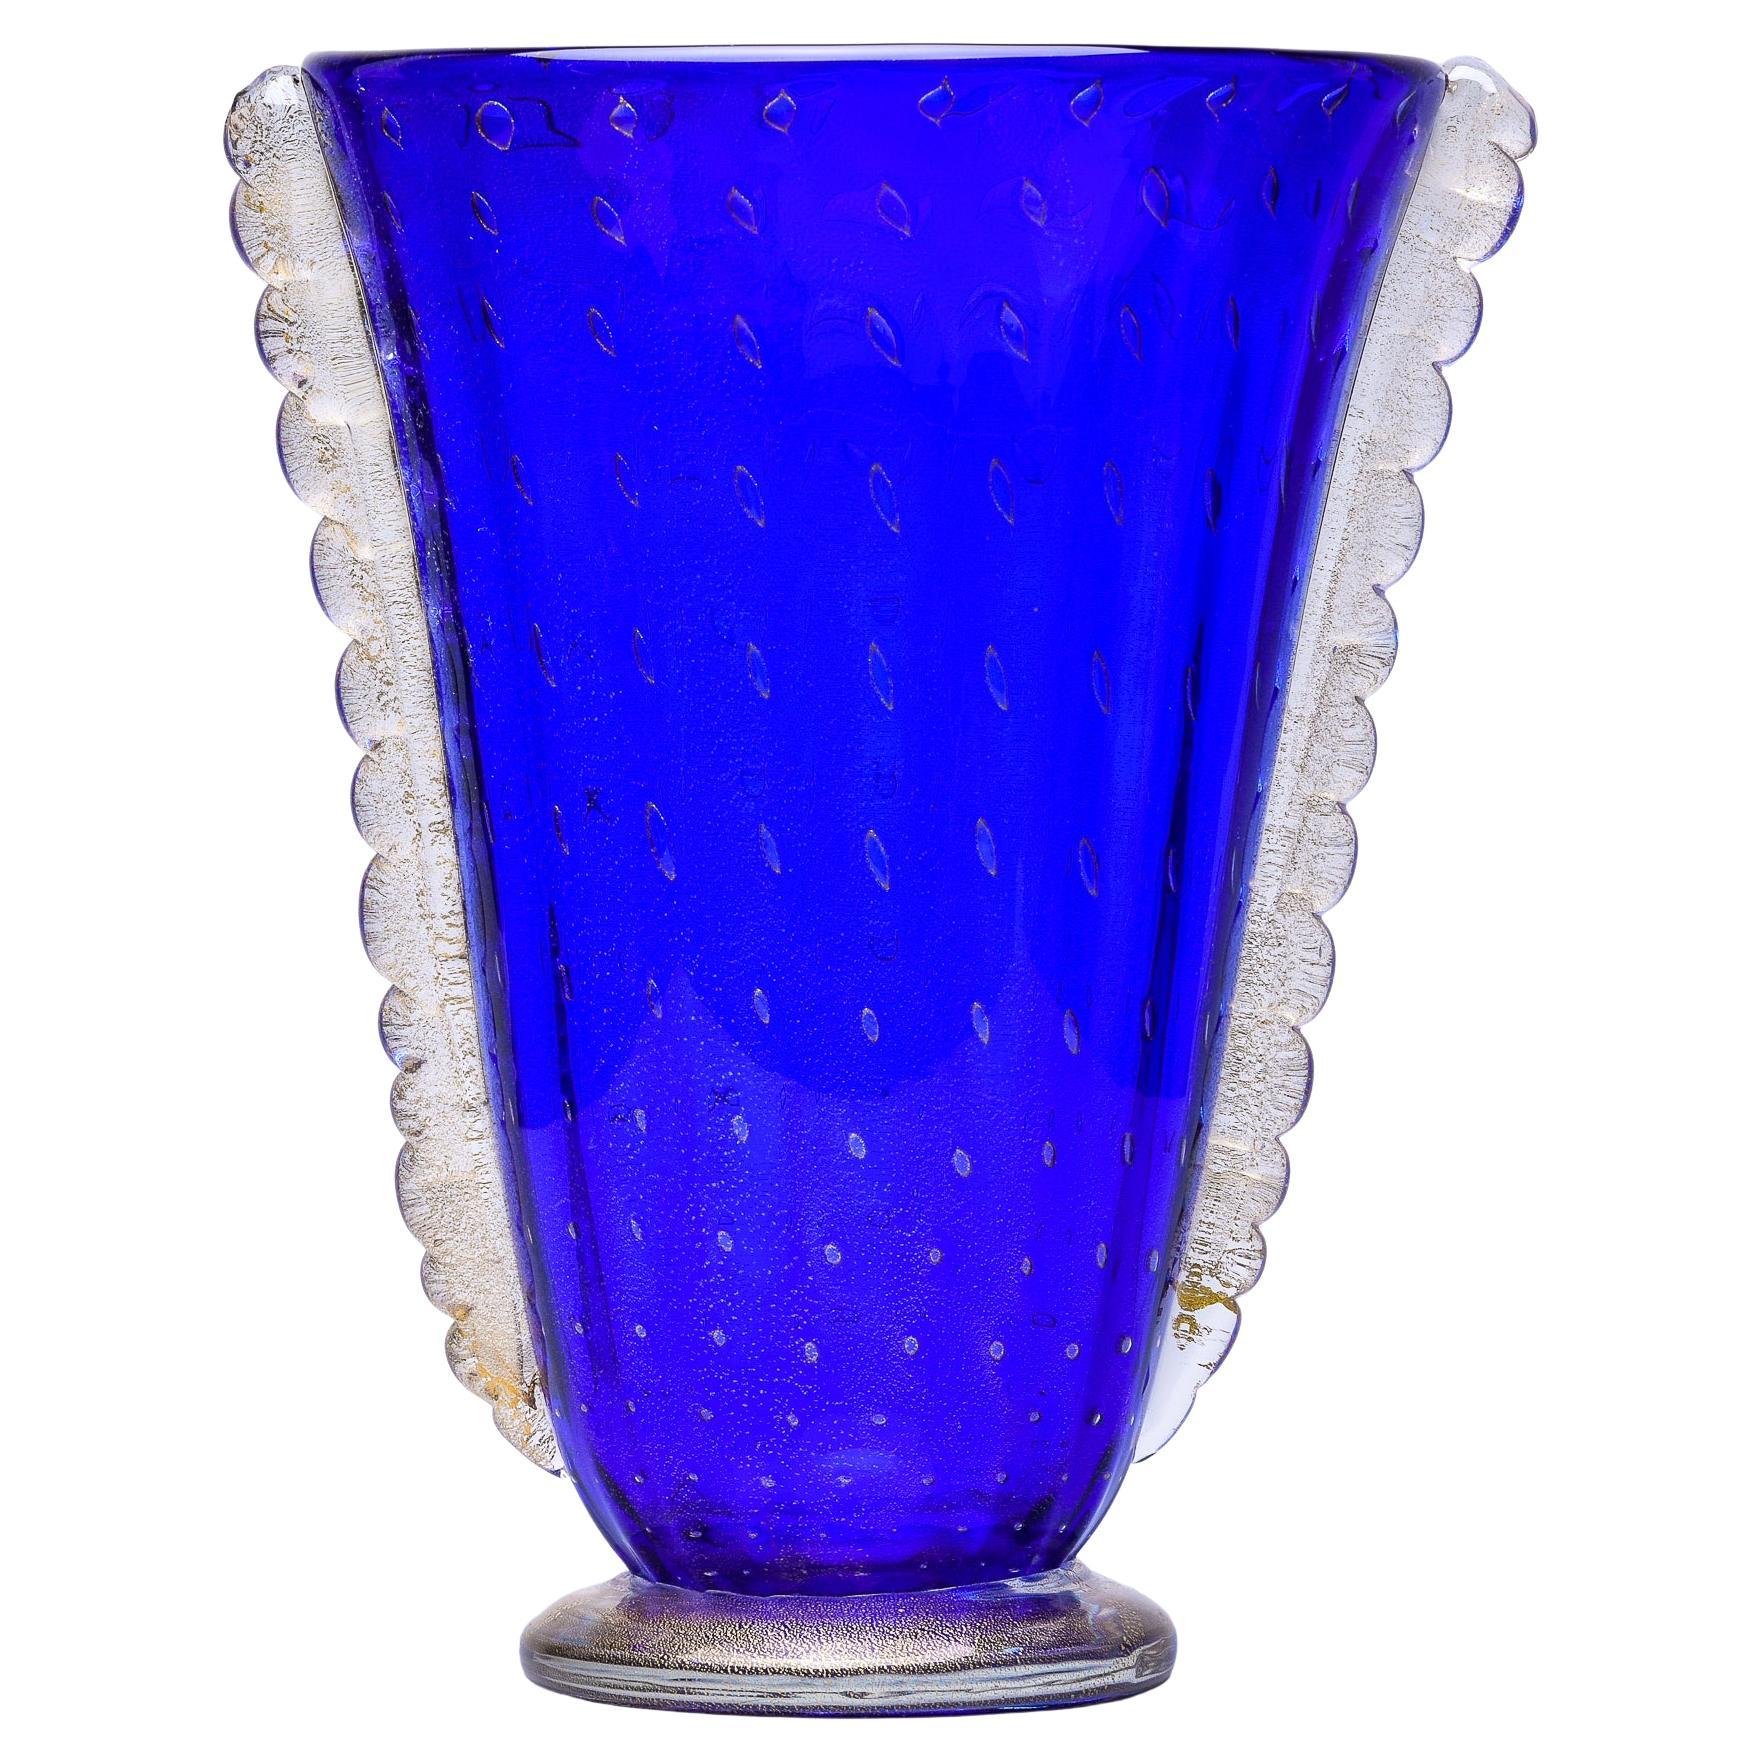 Barovier Vase in Blue Murano Glass with Gold Inclusions and Clear Side Fins 